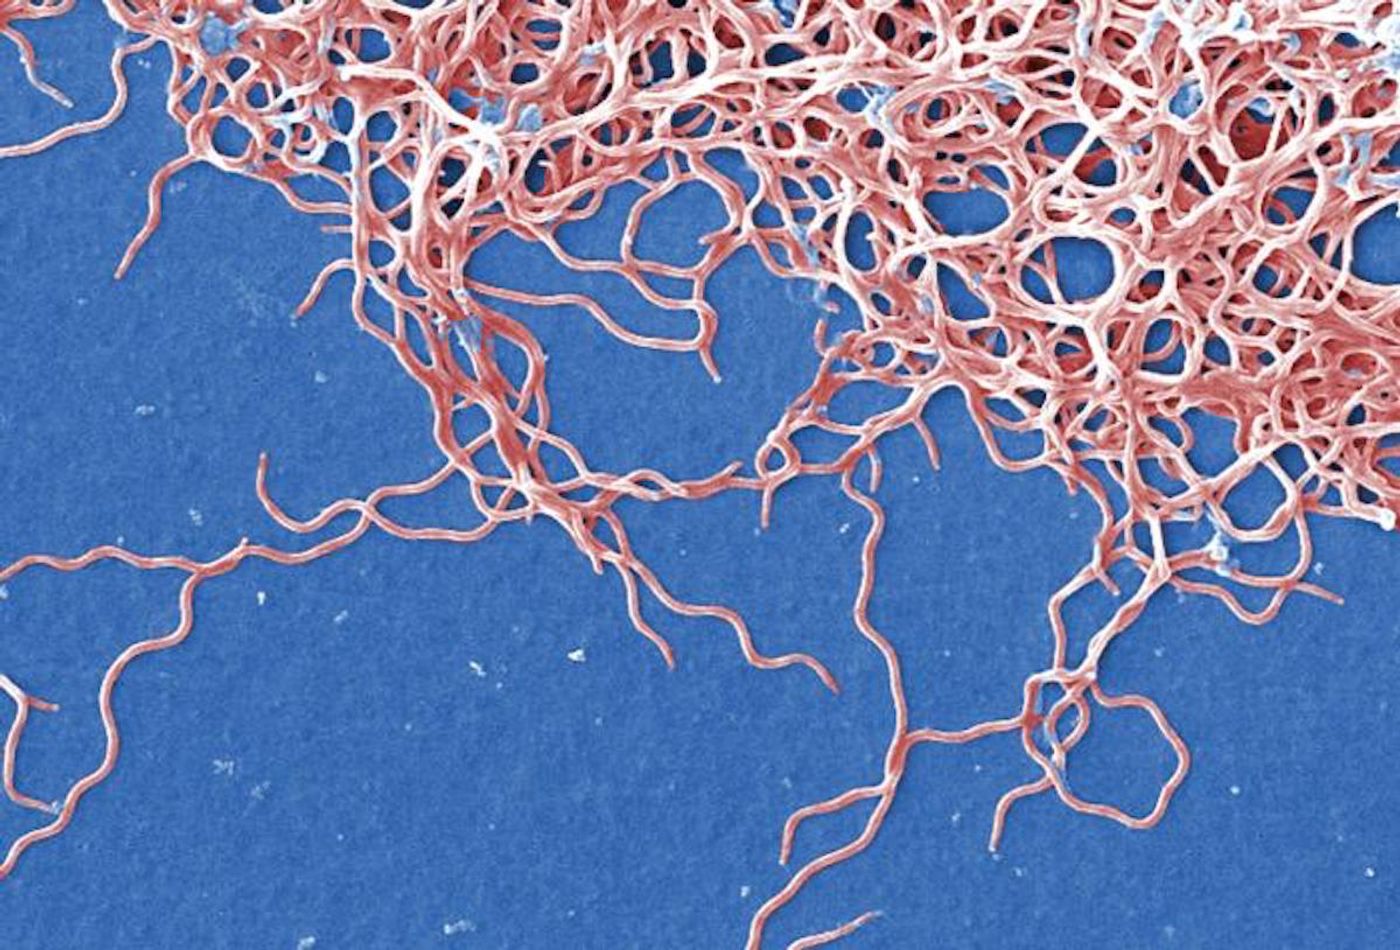 A digitally colorized SEM image of Borrelia burgdorferi bacteria, derived from a pure culture. This pathogen causes Lyme disease, a zoonotic ailment transmitted from ticks to humans / Credit: CDC/ Claudia Molins / Photo Credit: Janice Haney Carr